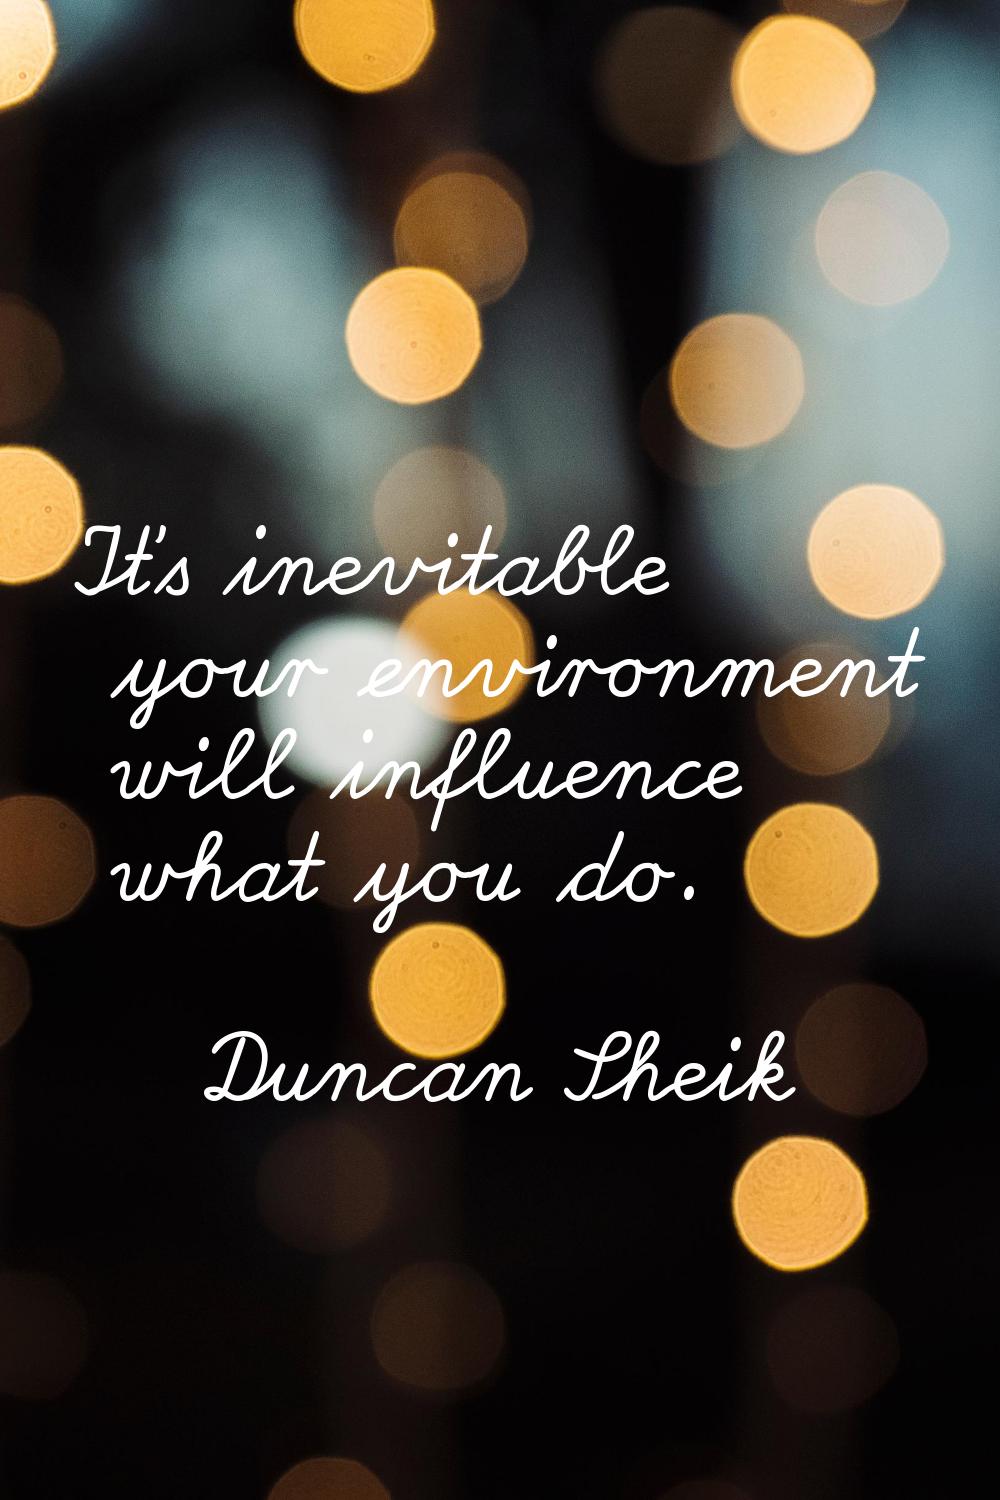 It's inevitable your environment will influence what you do.